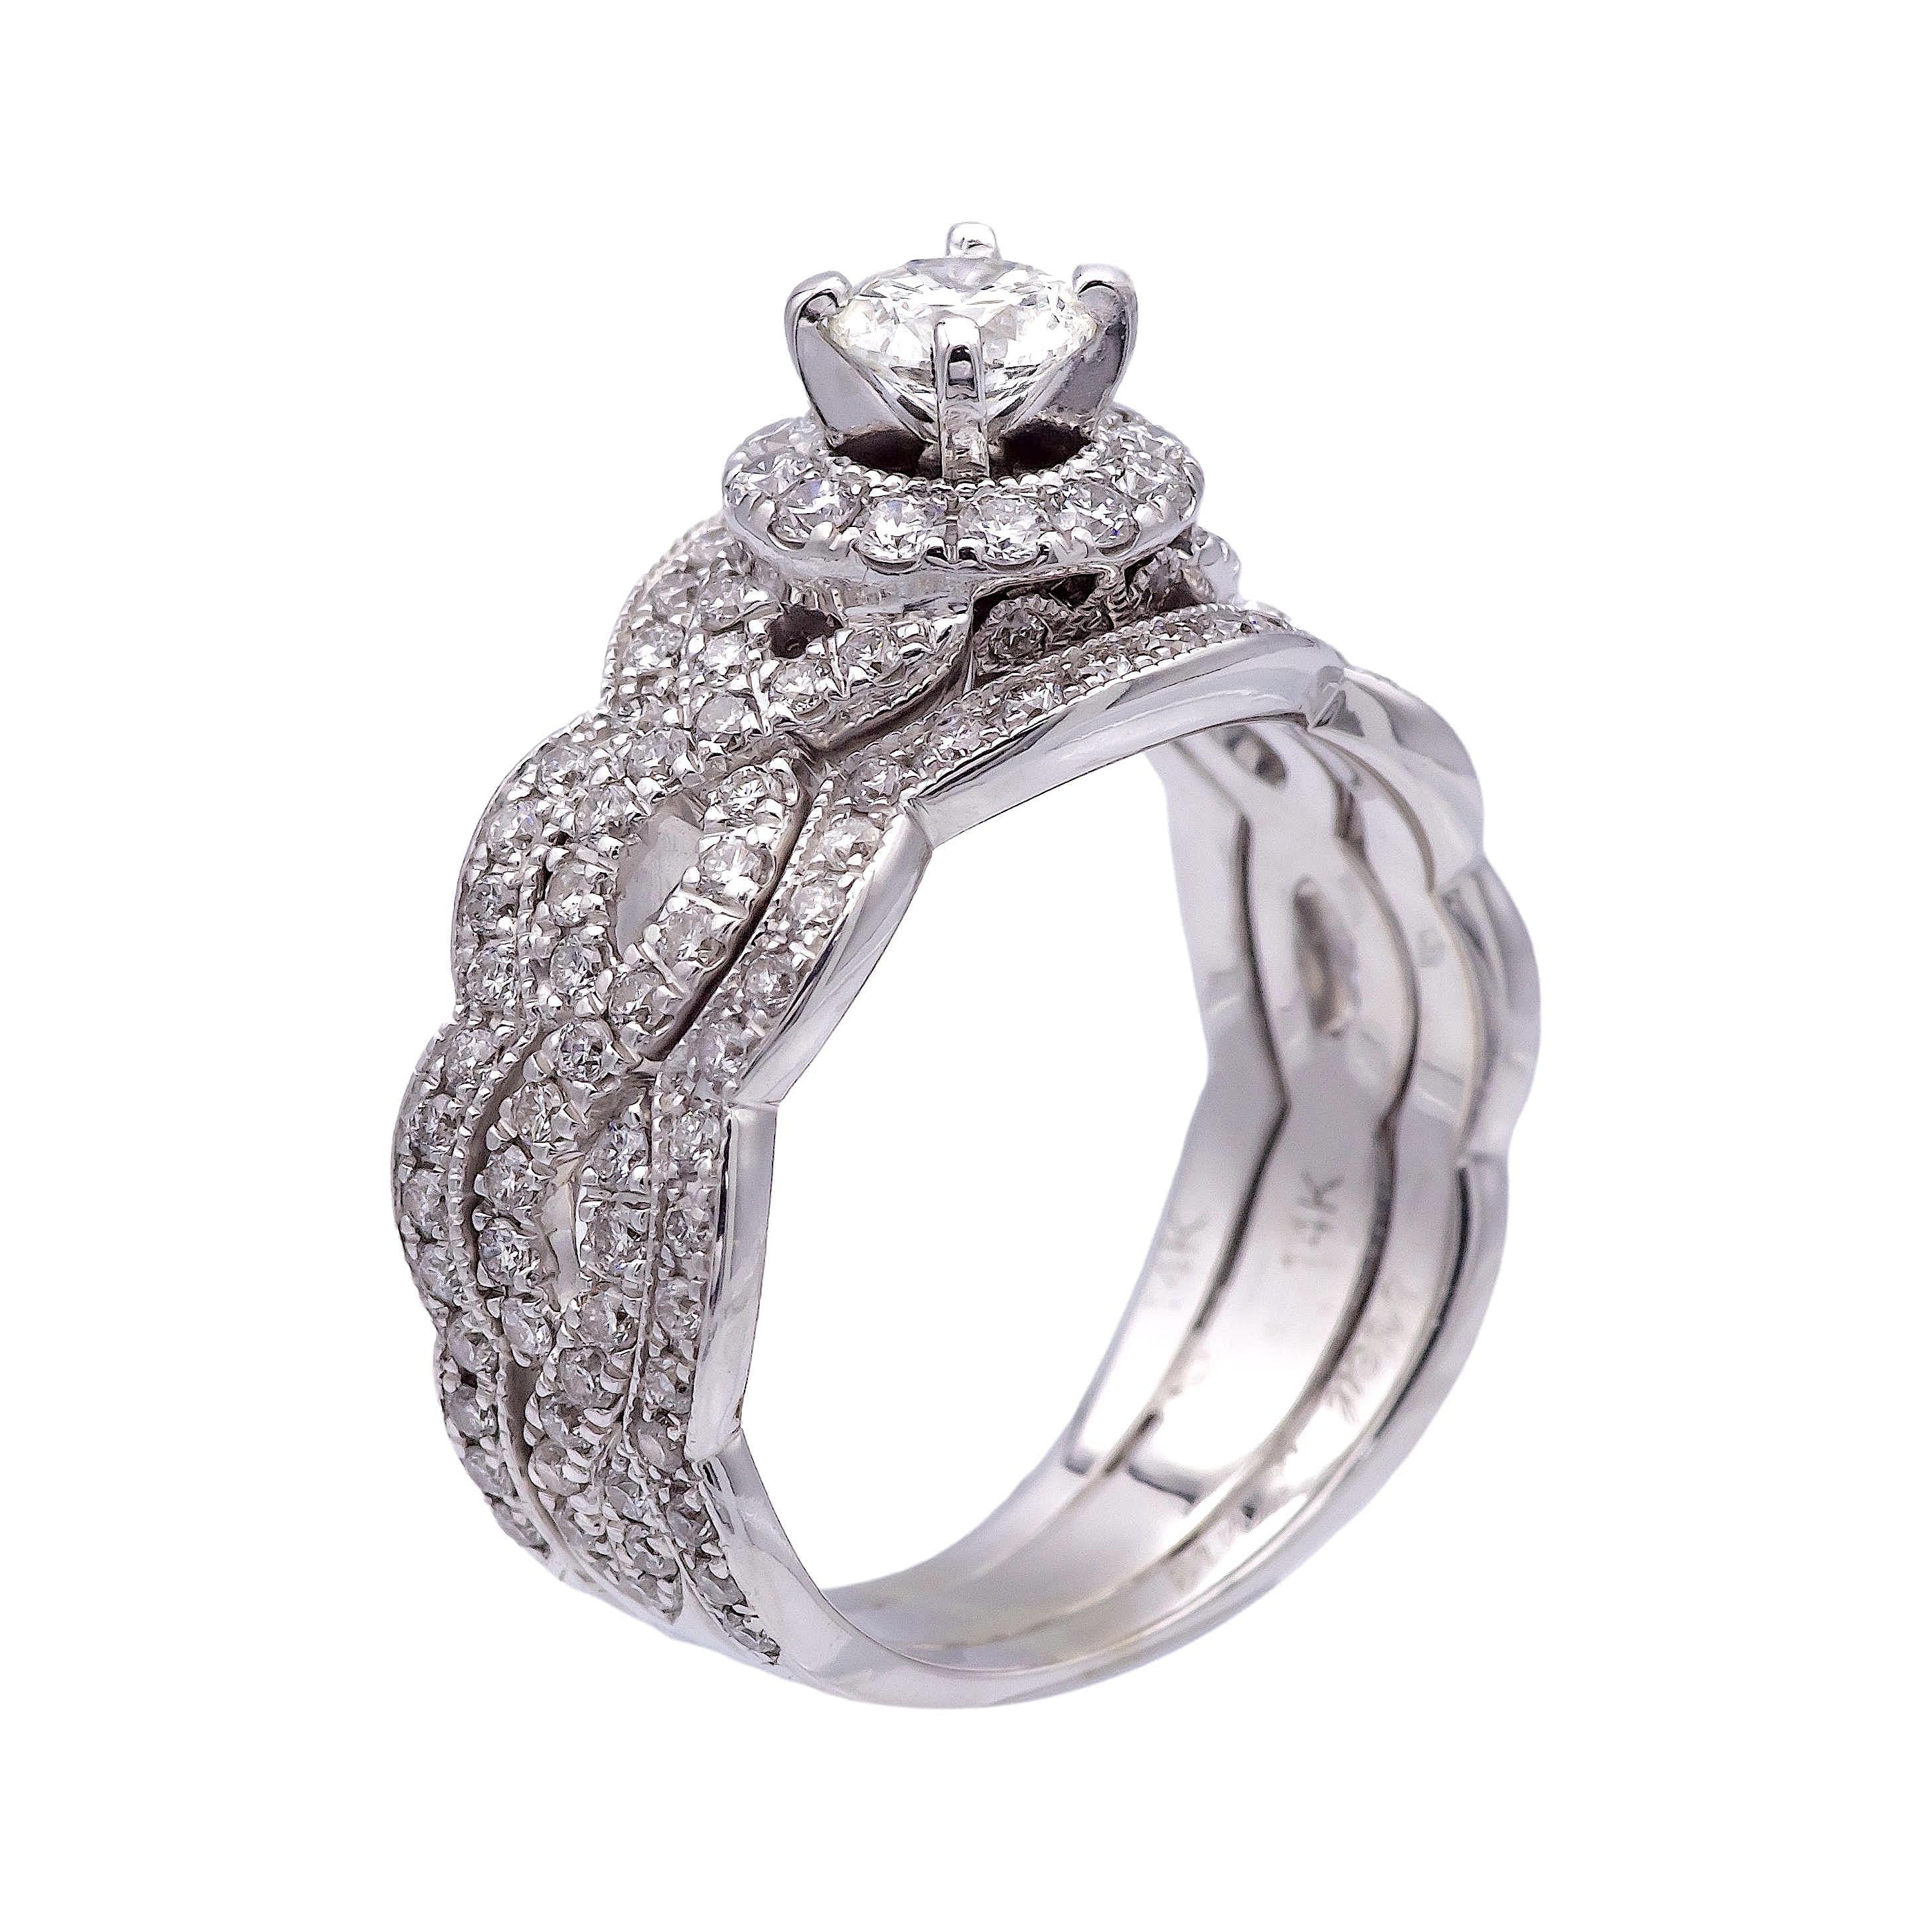 Neil Lane diamond engagement ring, meticulously crafted in 14 karat white gold featuring a mesmerizing round brilliant cut diamond, weighing approximately 0.36 carats, exuding brilliance and elegance ranging H-I color and SI2 clarity. Surrounding